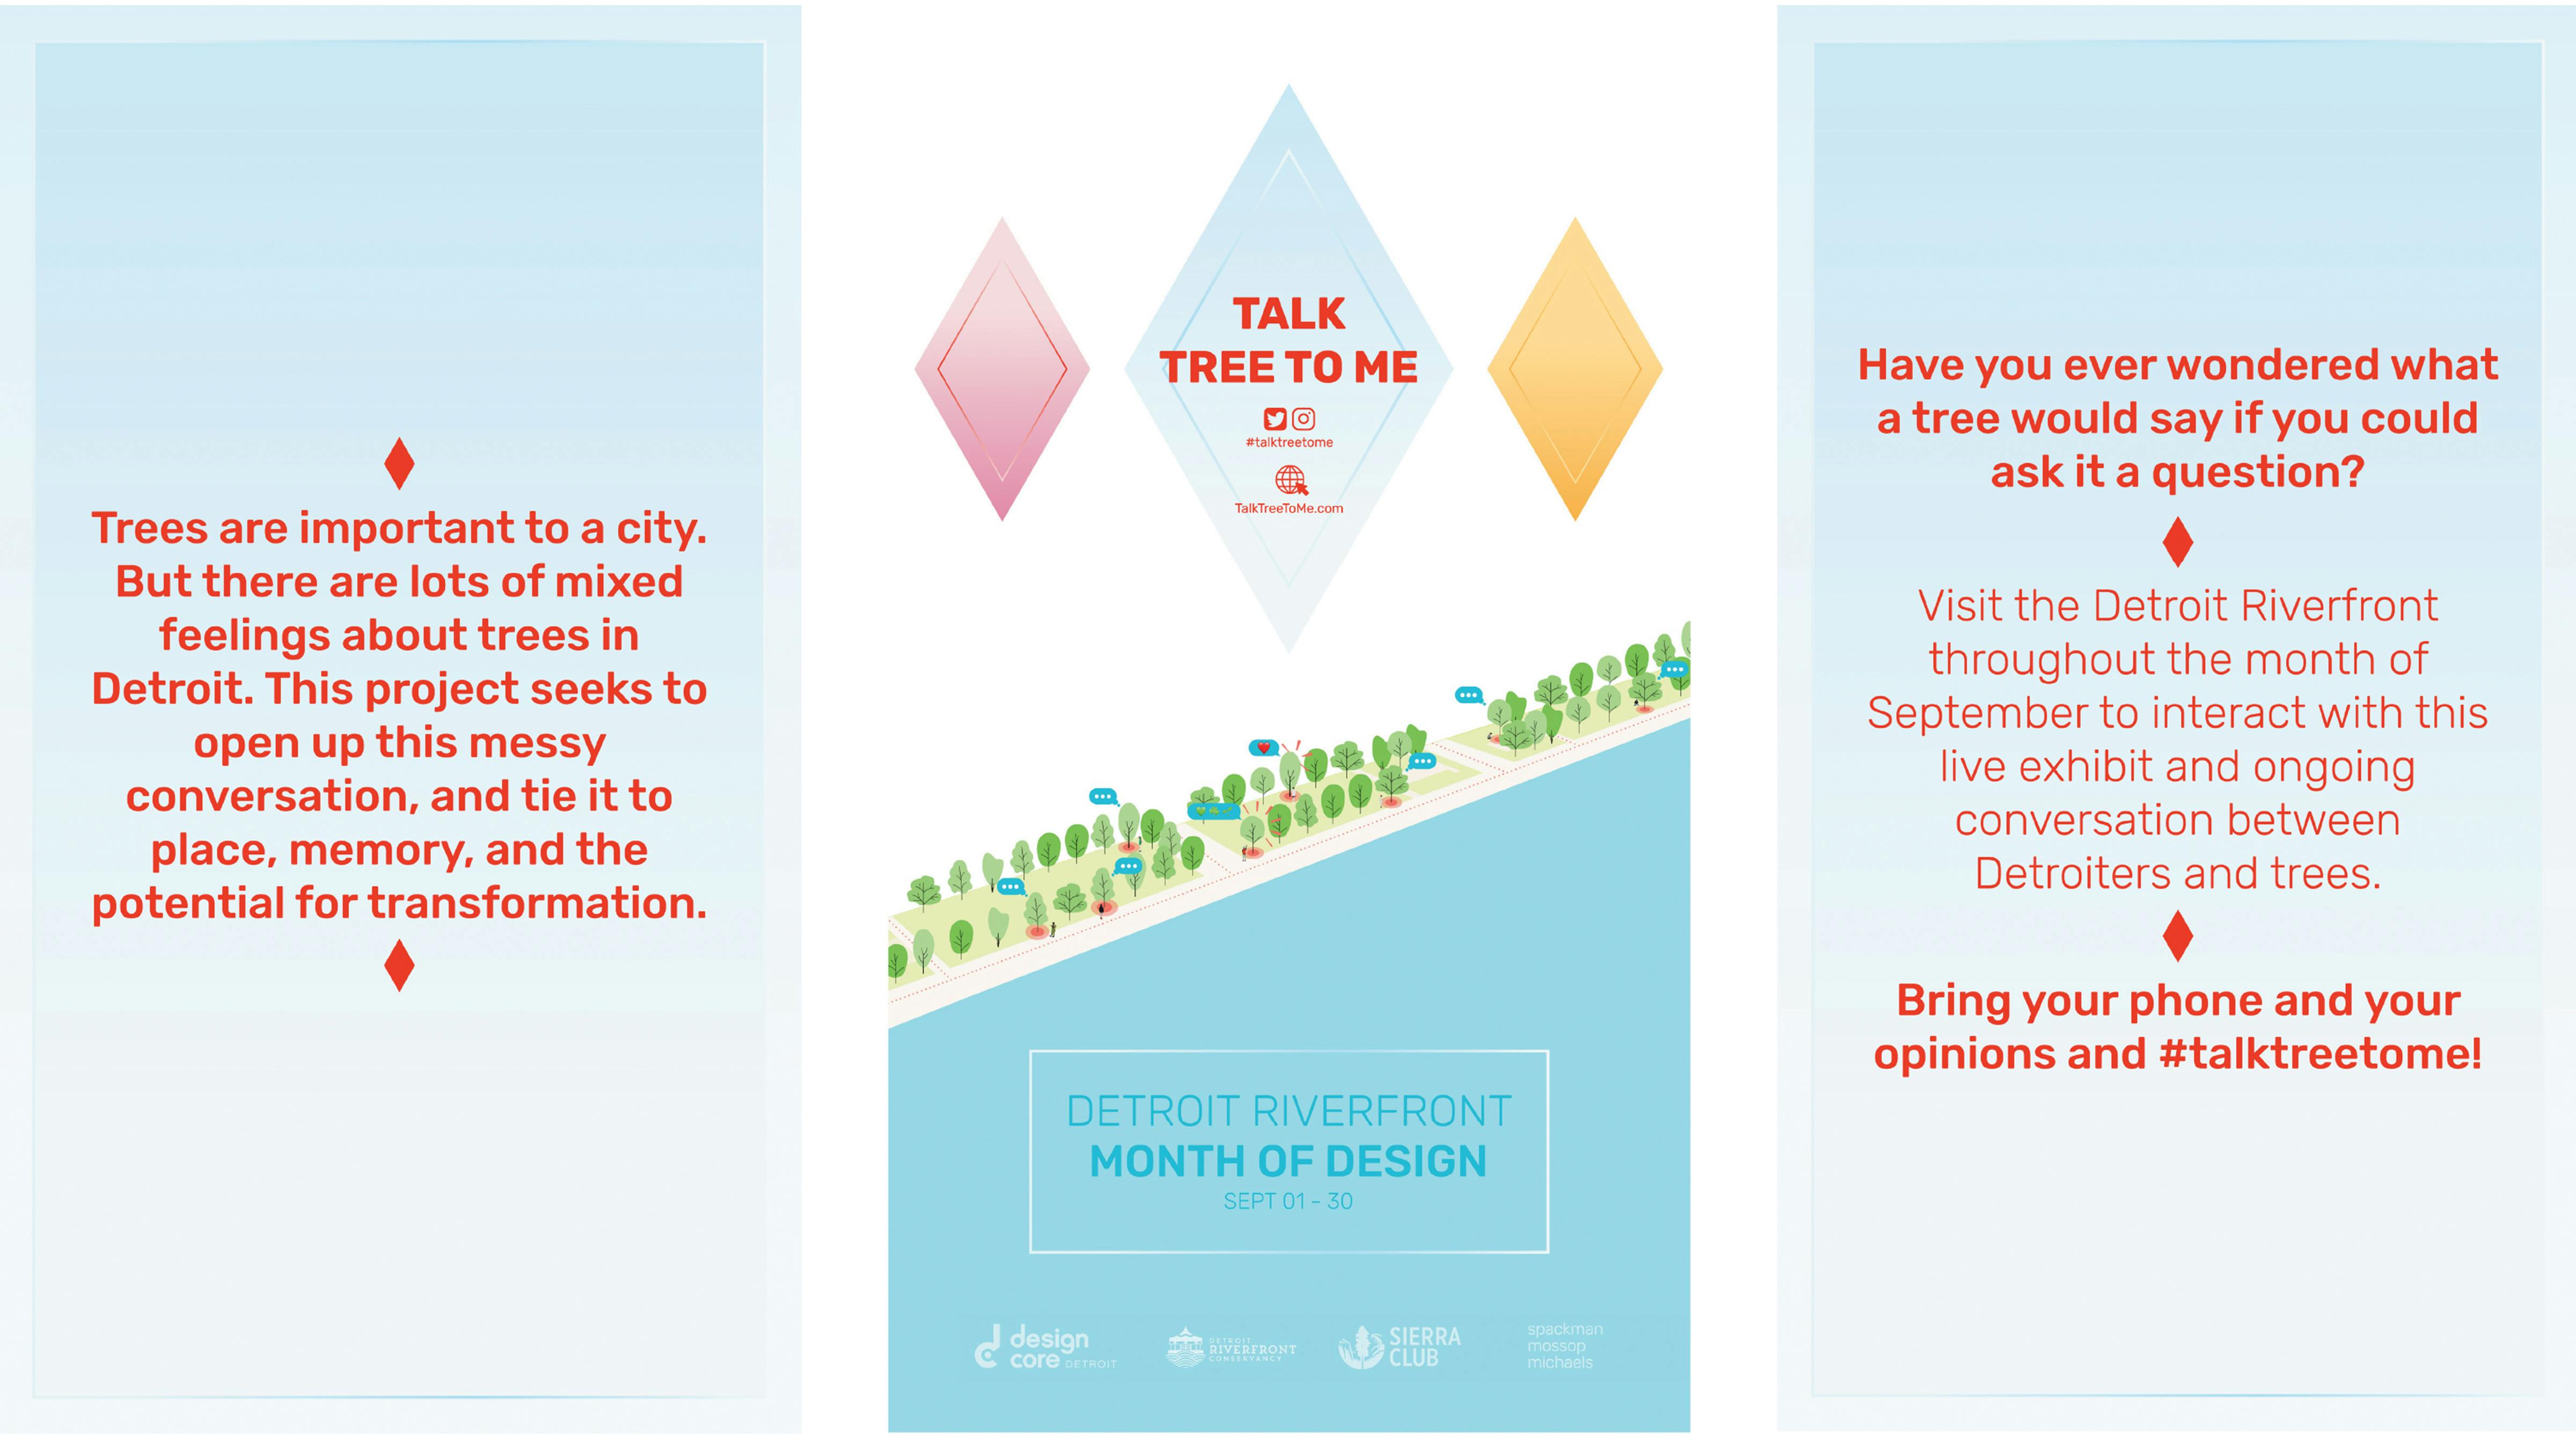 Talk Tree to Me poster for social media promoting Month of Design at Detroit riverfront.